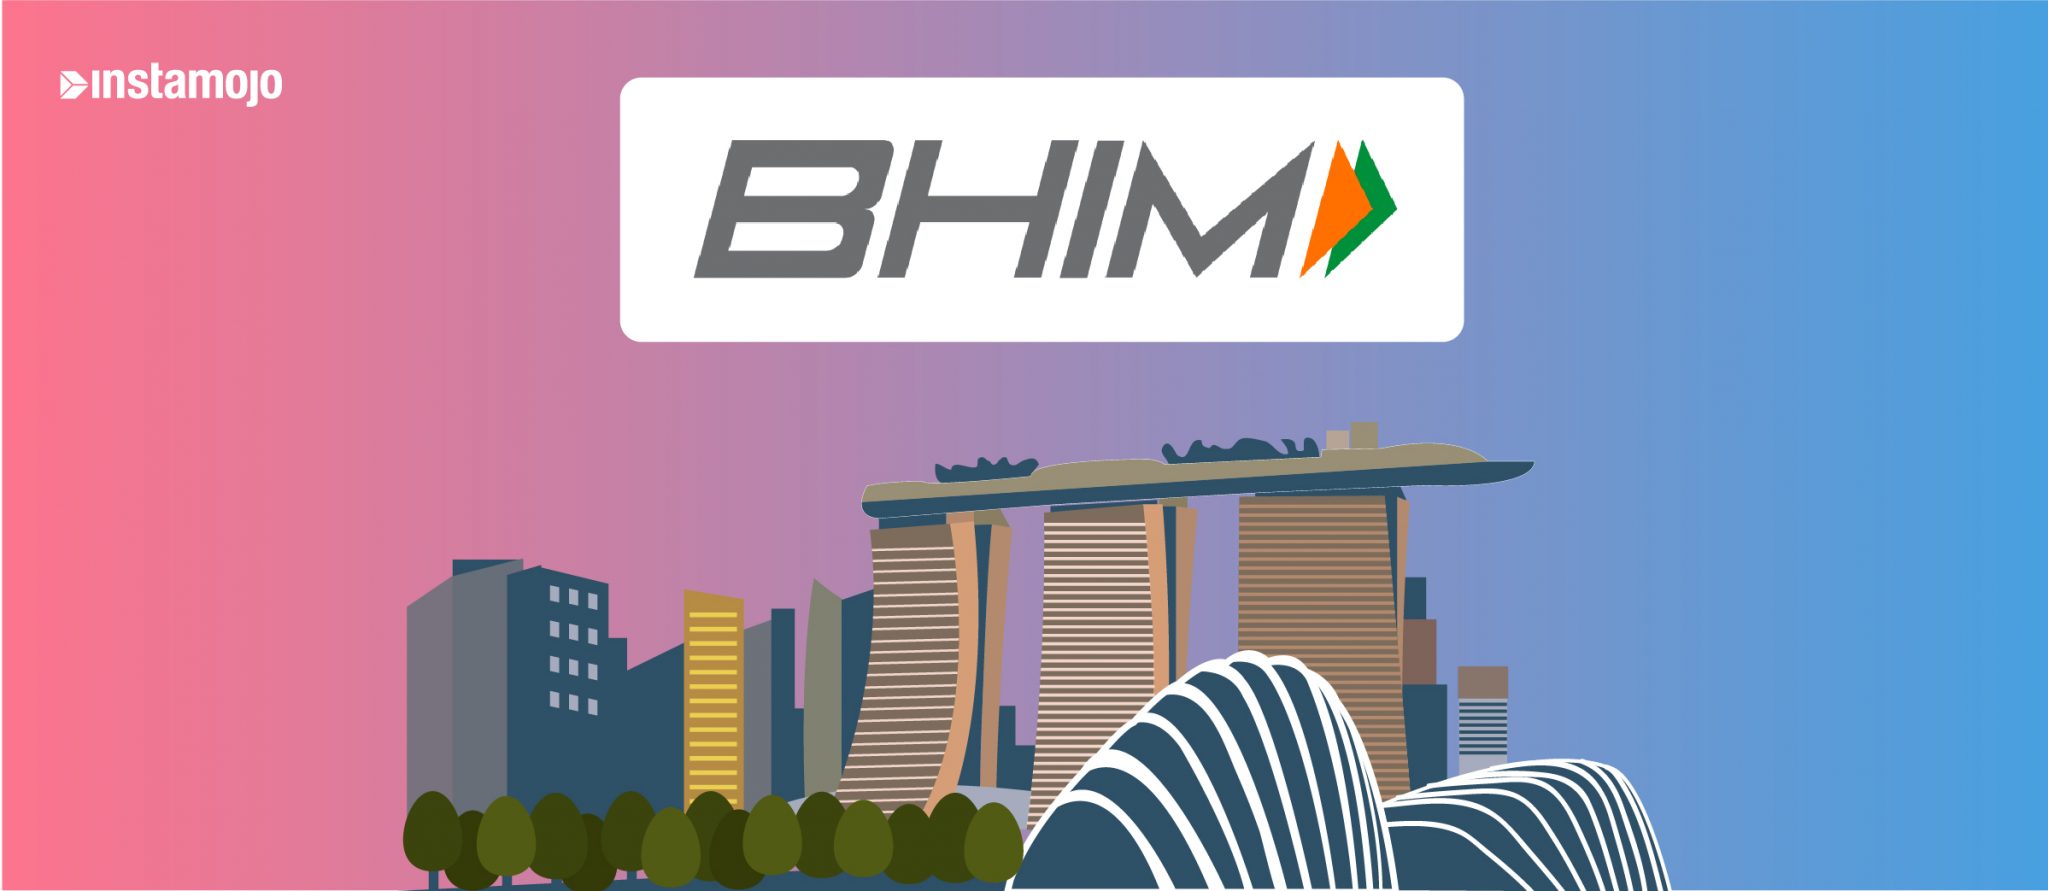 BHIM: PM Modi Launches UPI Payments in Singapore